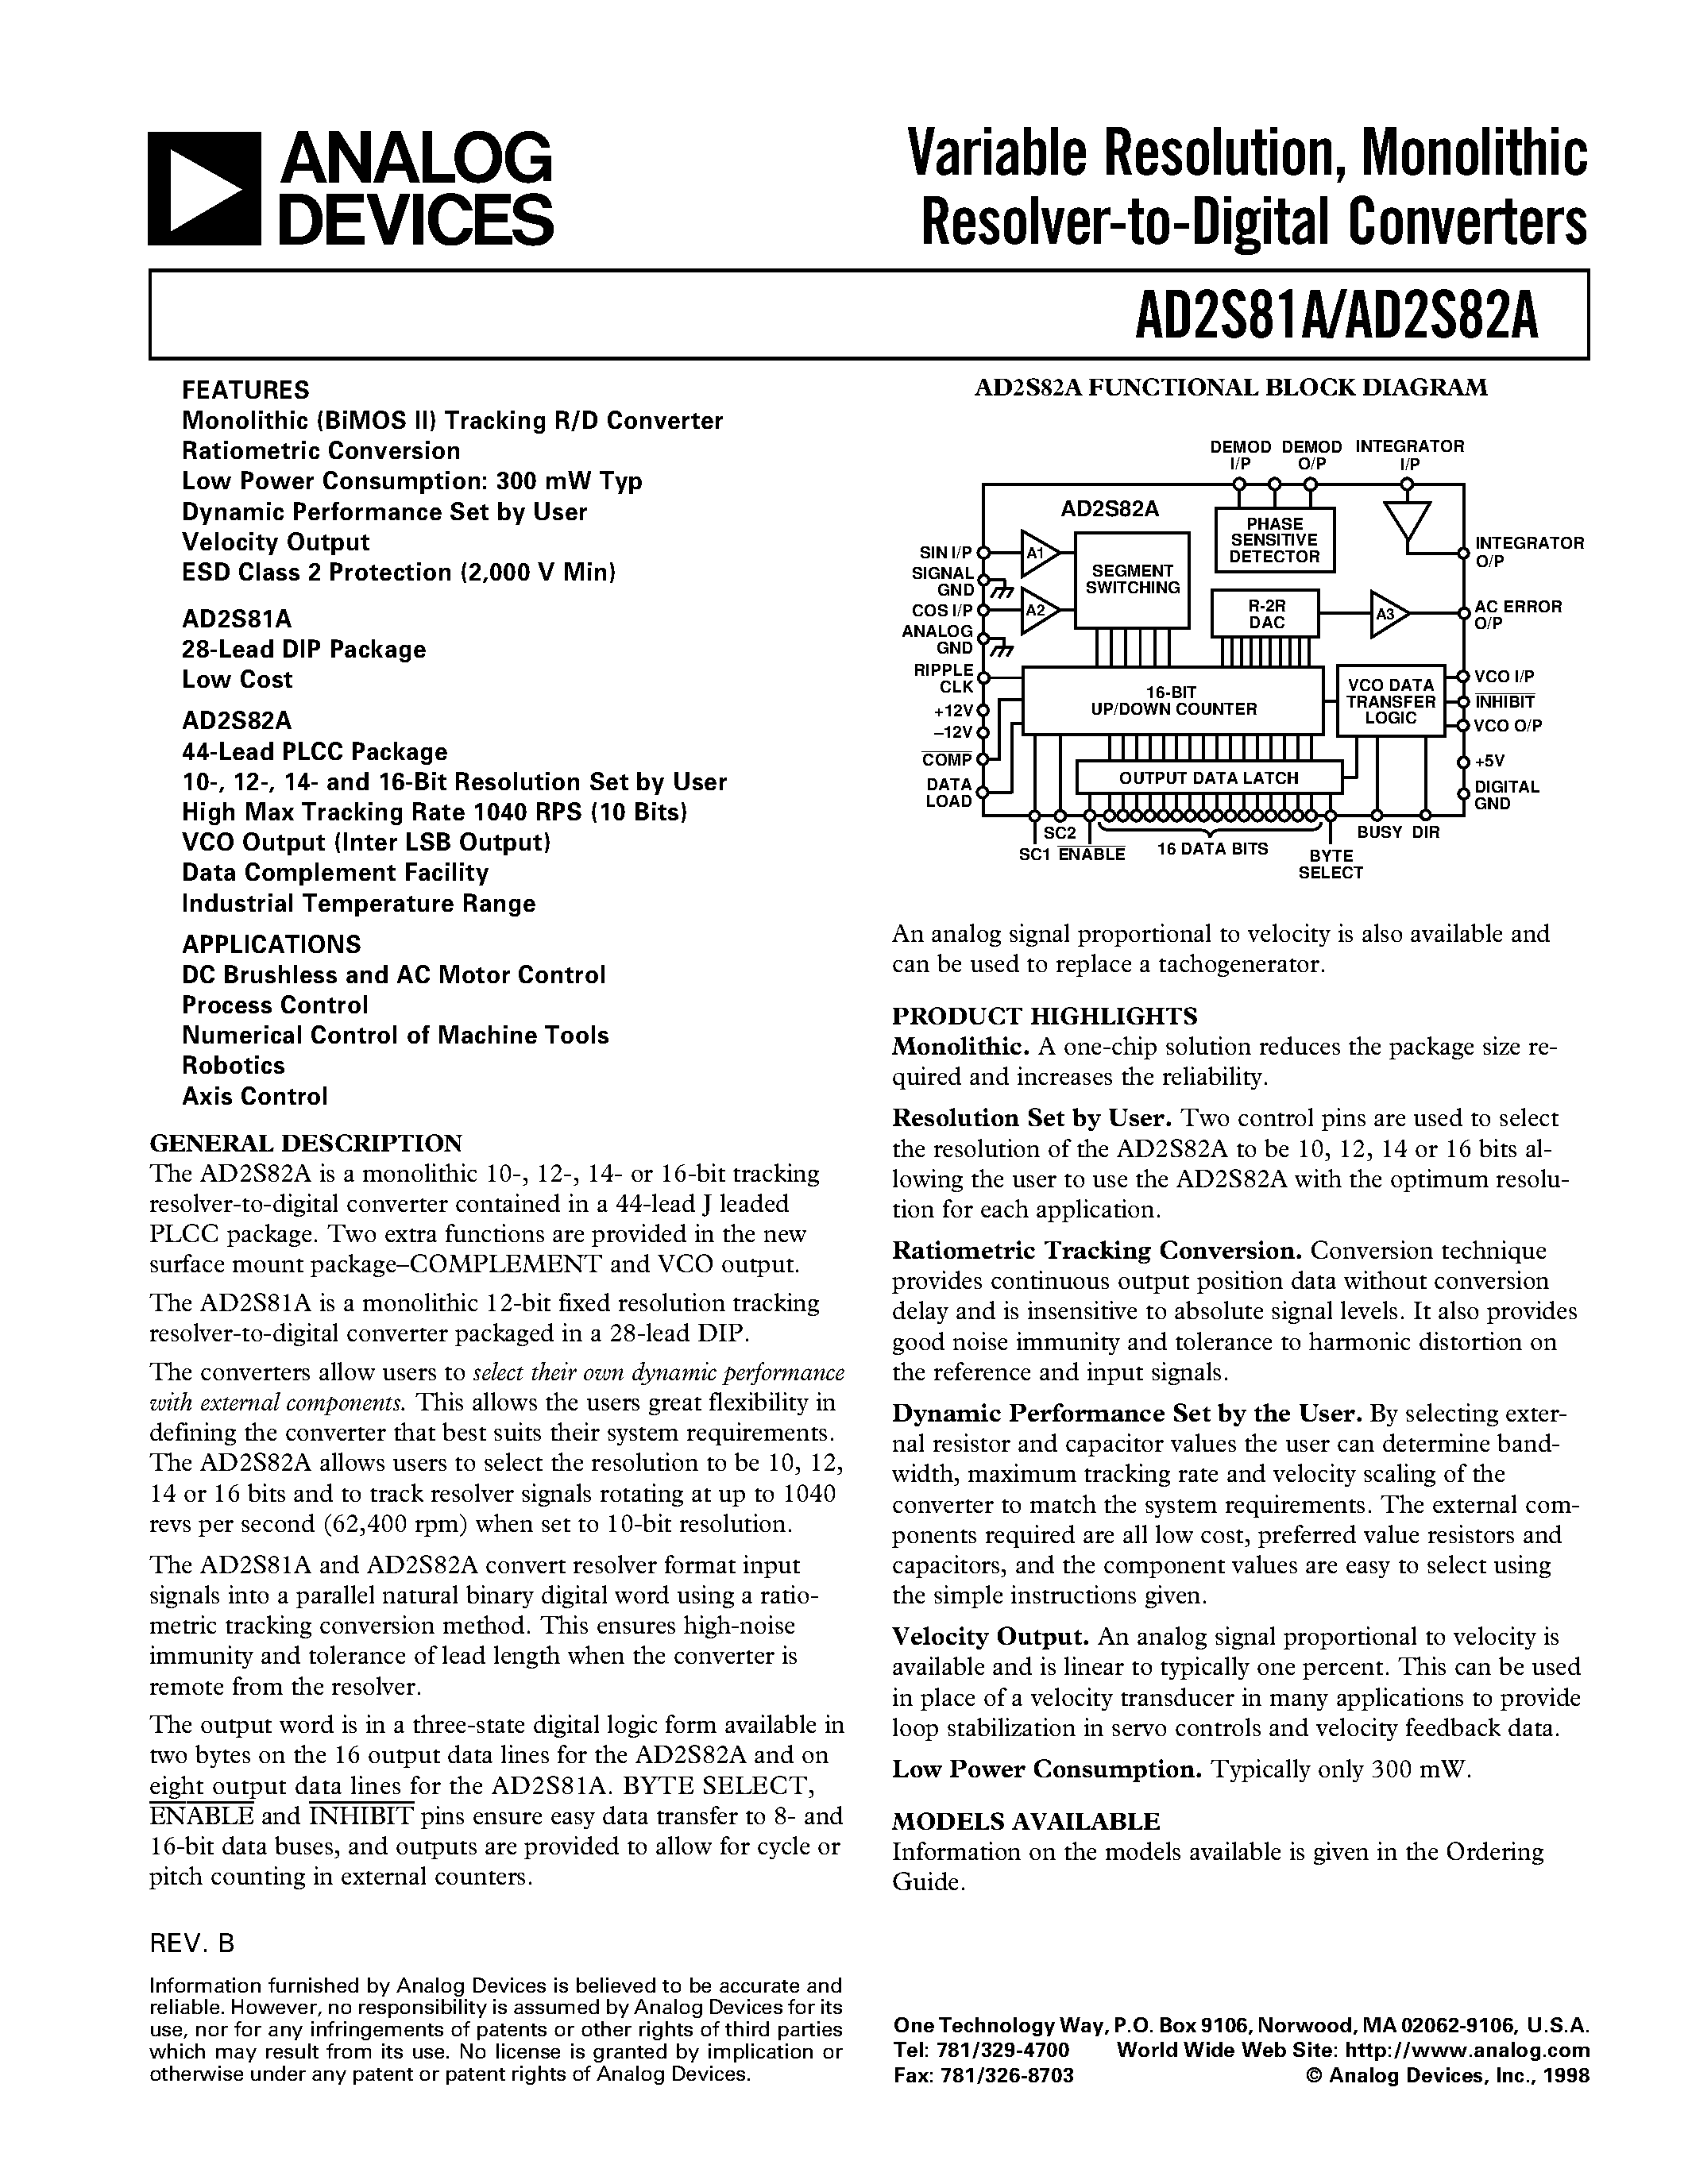 Datasheet AD2S82ALP - Variable Resolution/ Monolithic Resolver-to-Digital Converters page 1